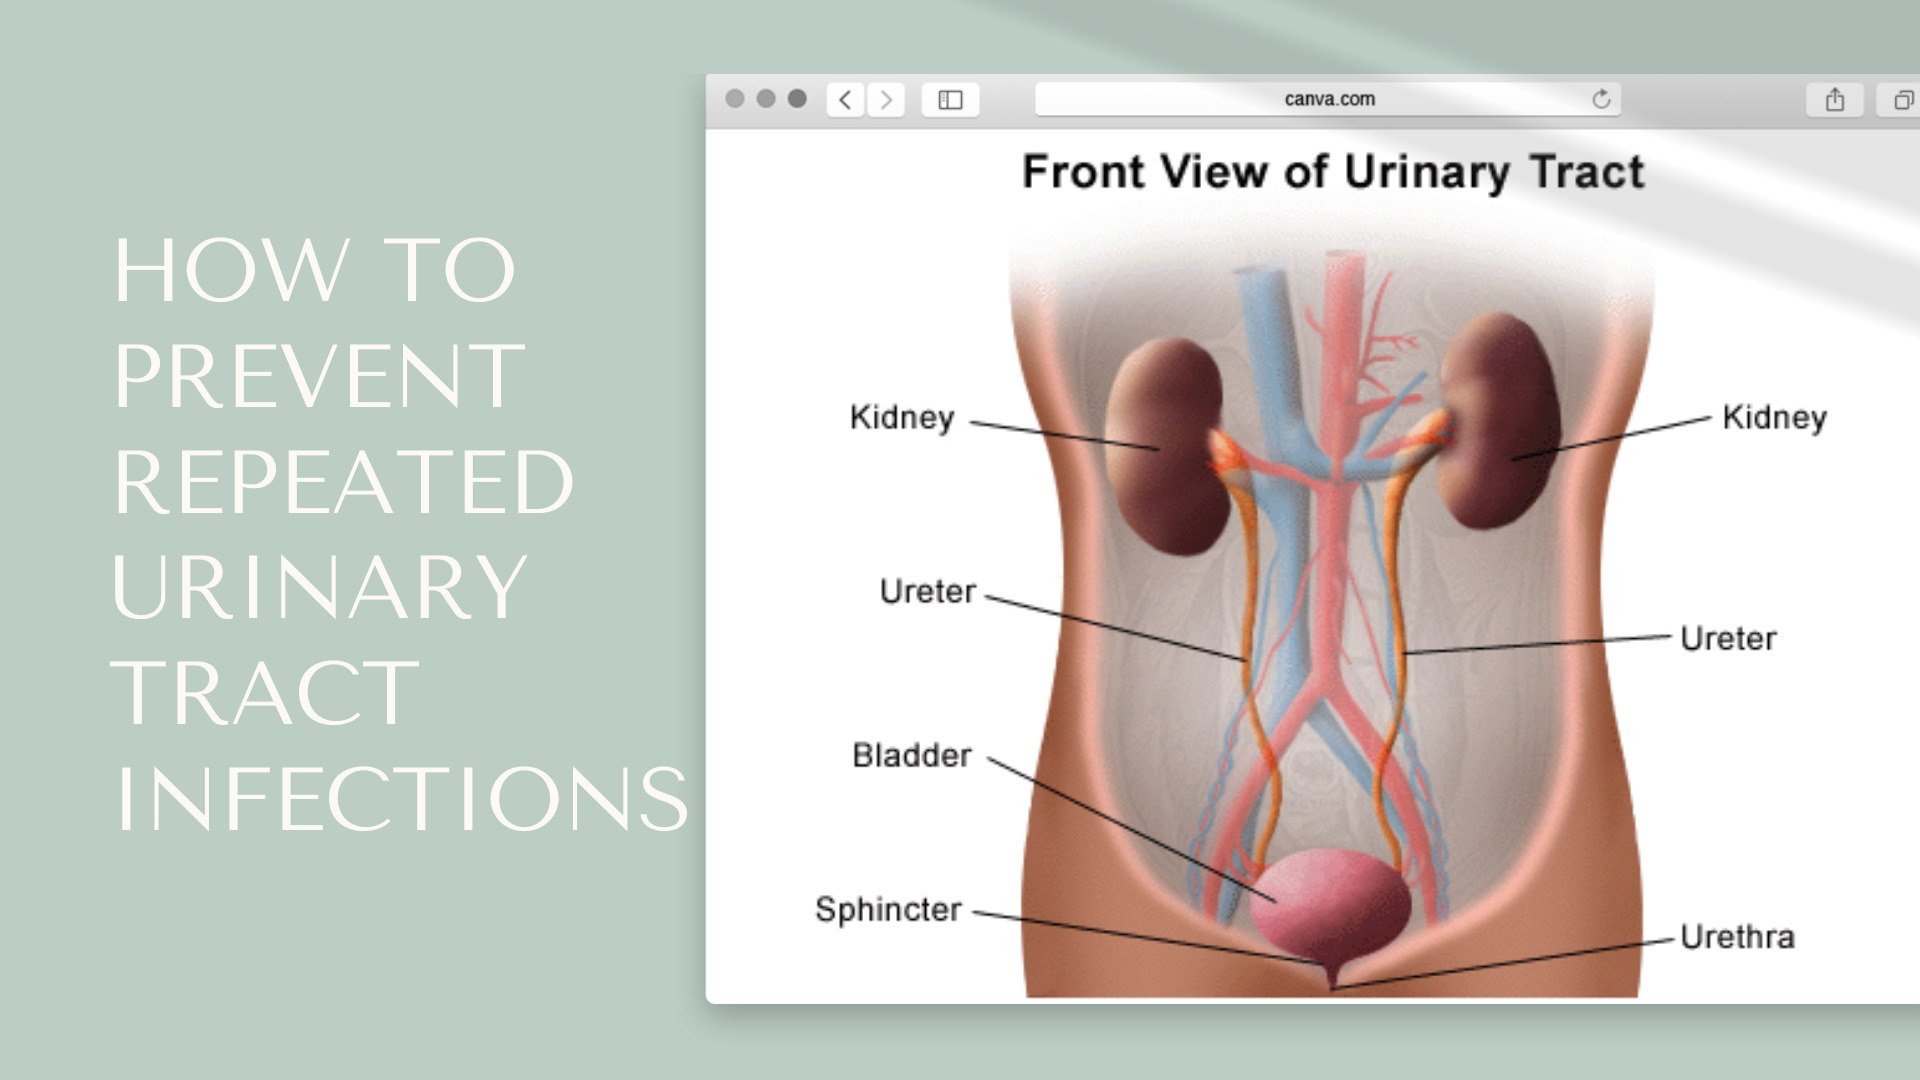 How to prevent urinary tract infections (UTI)? Balance